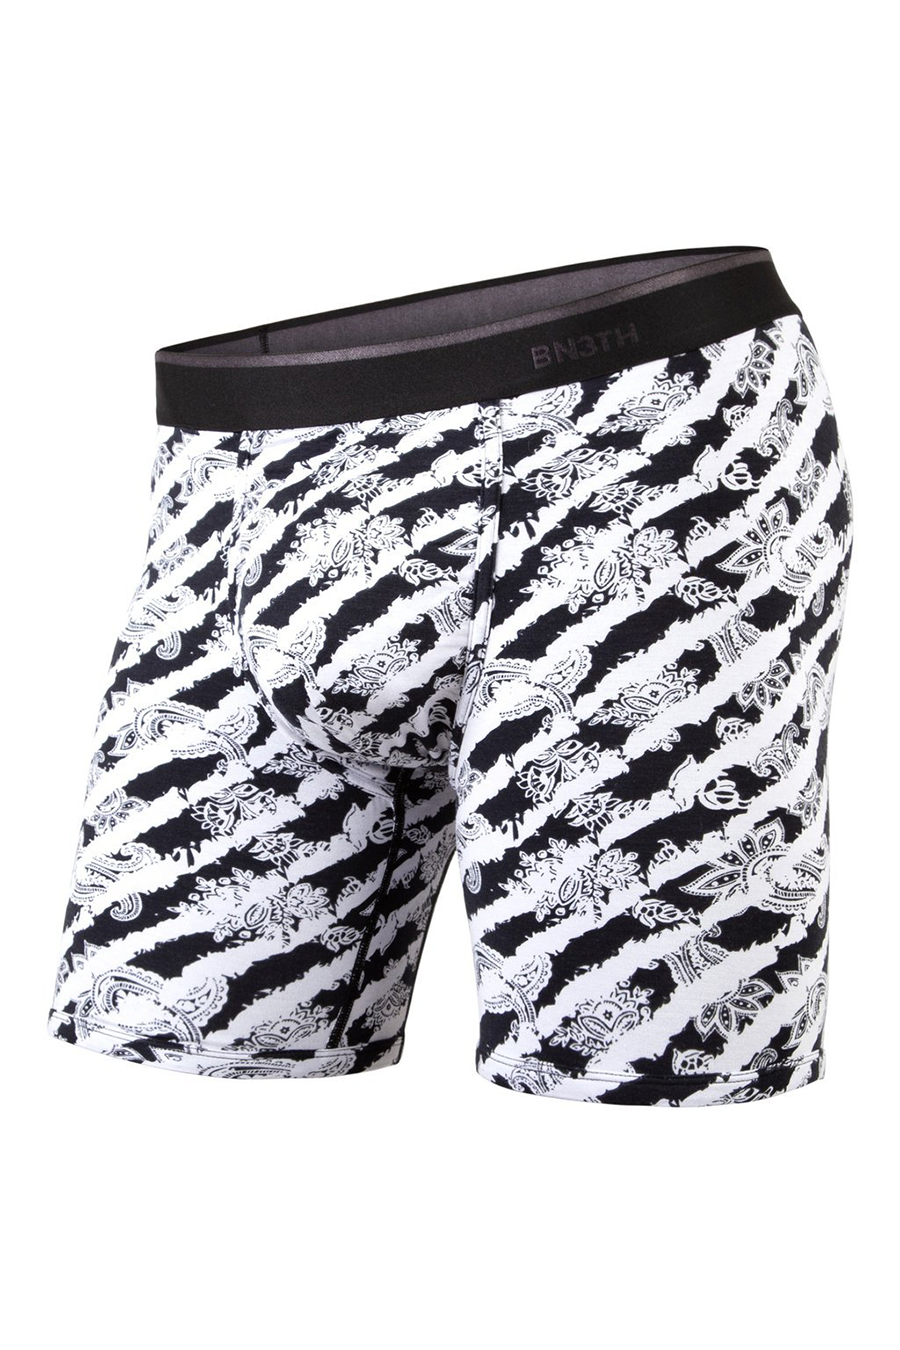 Classic Boxer Brief Print | Pays Lee Black - West of Camden - Main Image Number 2 of 5